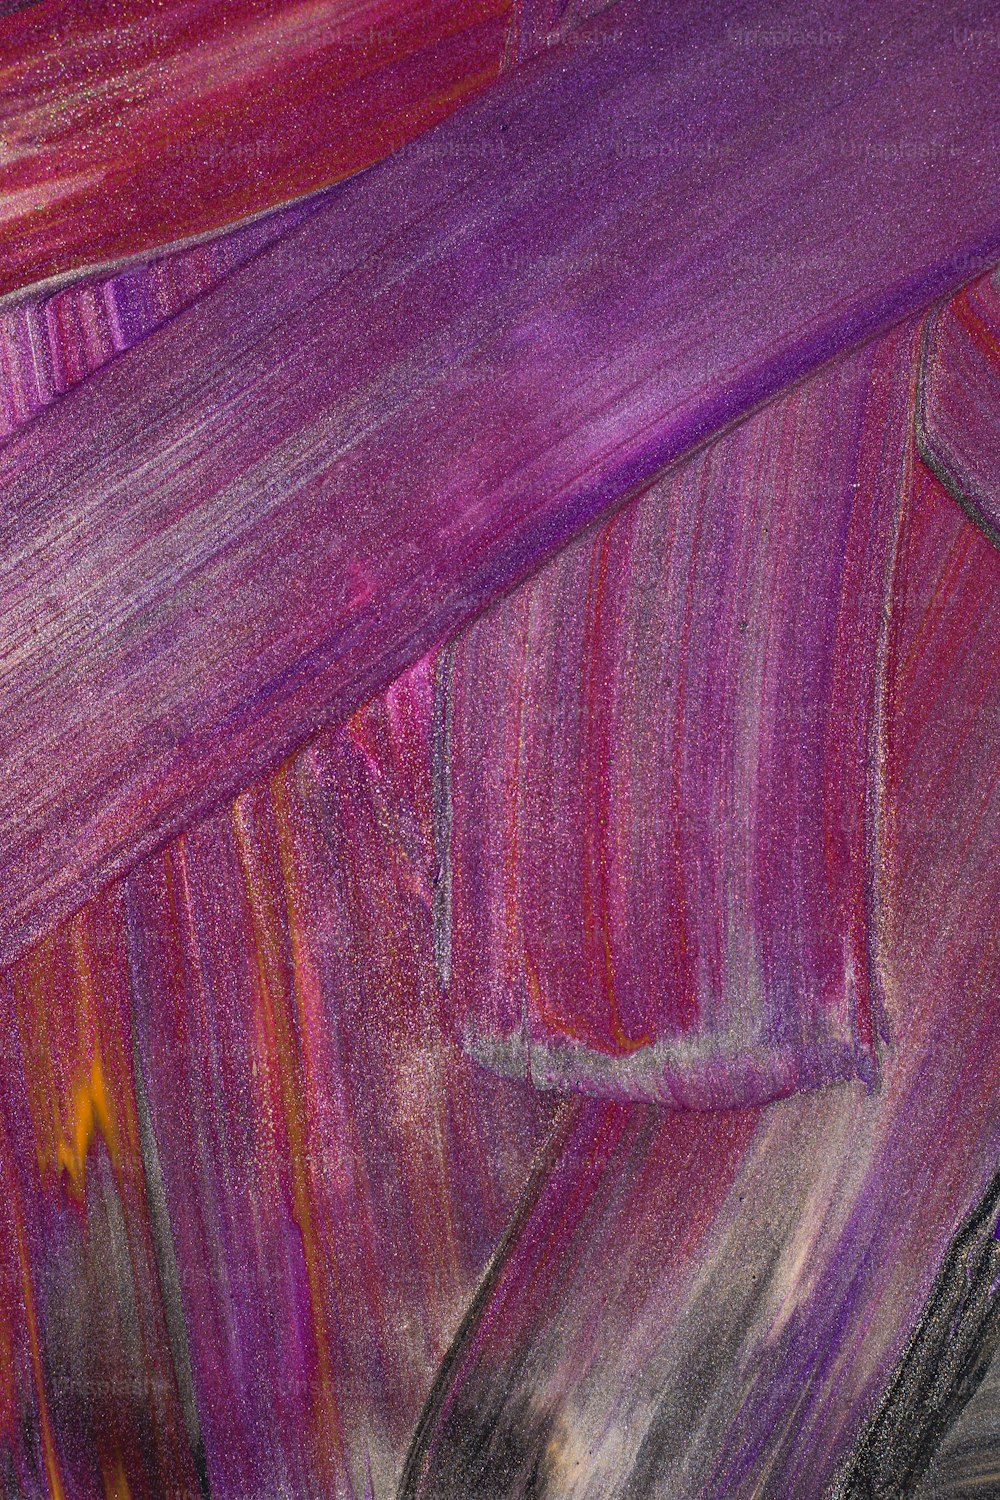 a close up of a painting of purple and red